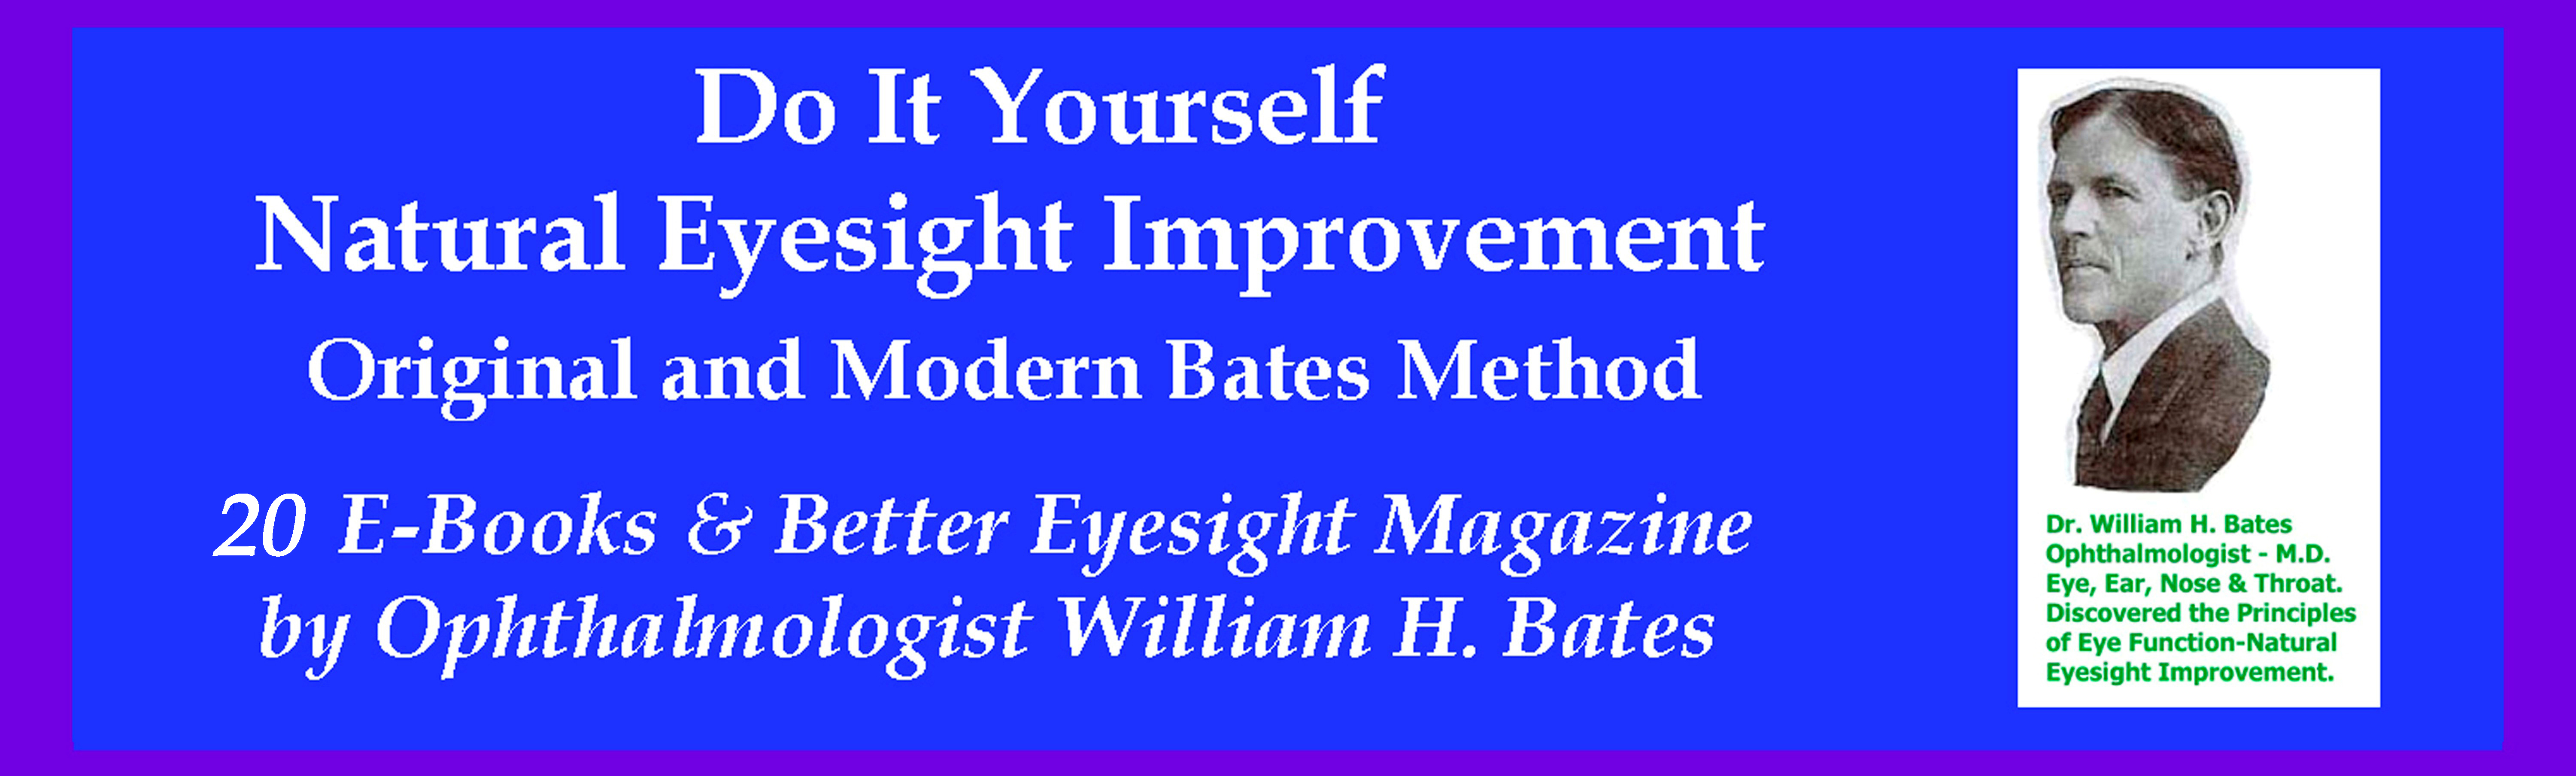 20 E-Books by Ophthalmologist William H. Bates and Clark Night, Clearsight Publishing Co.